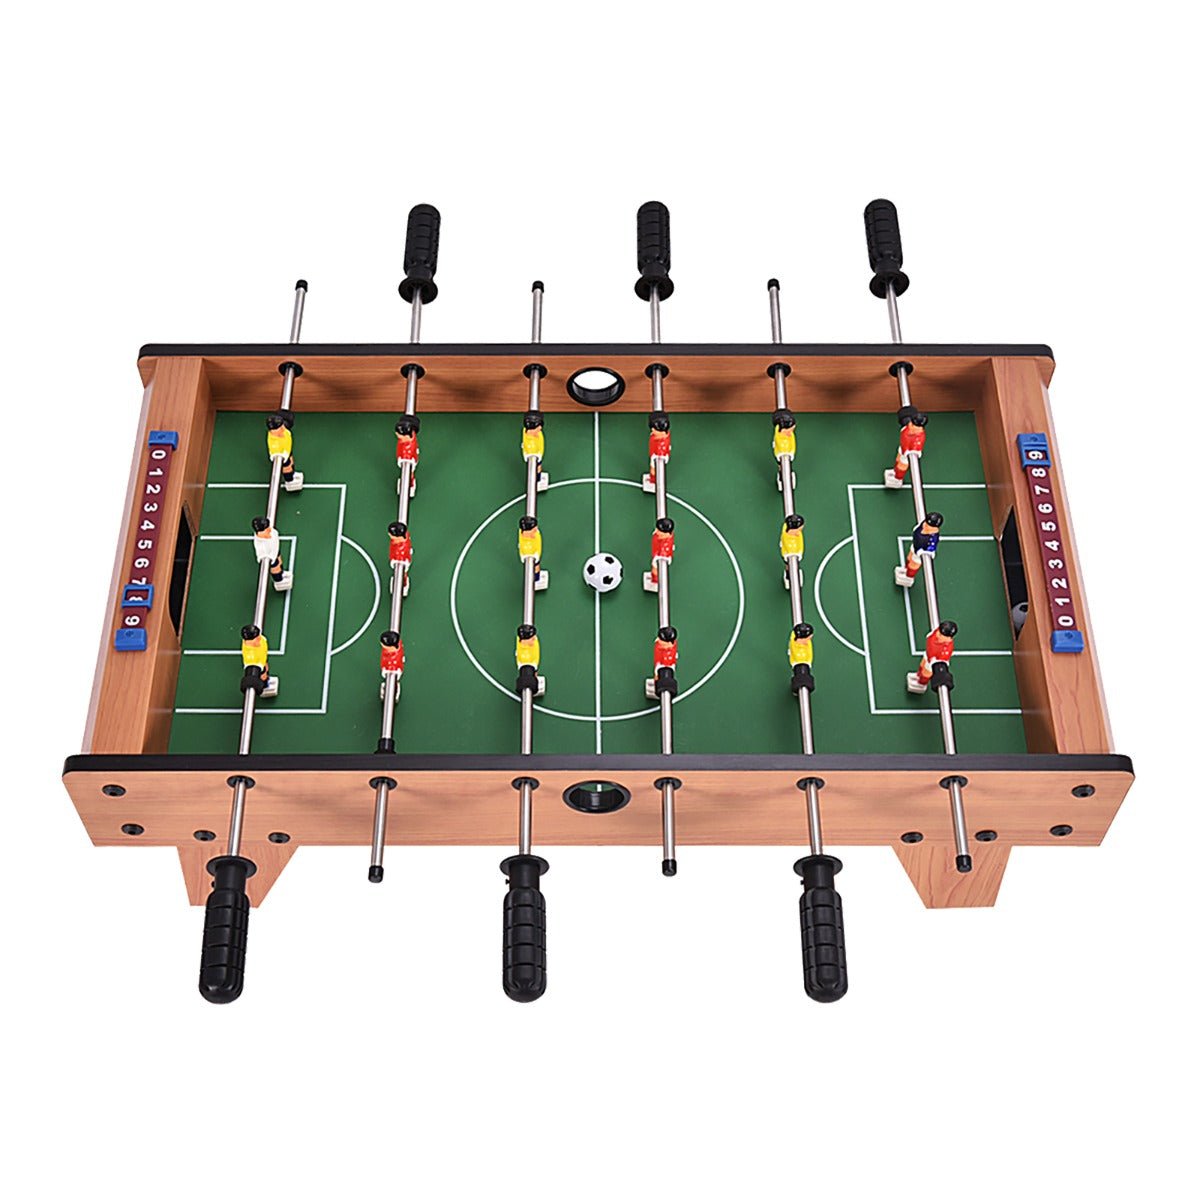 Foosball Fun for Everyone - Get Yours Today!